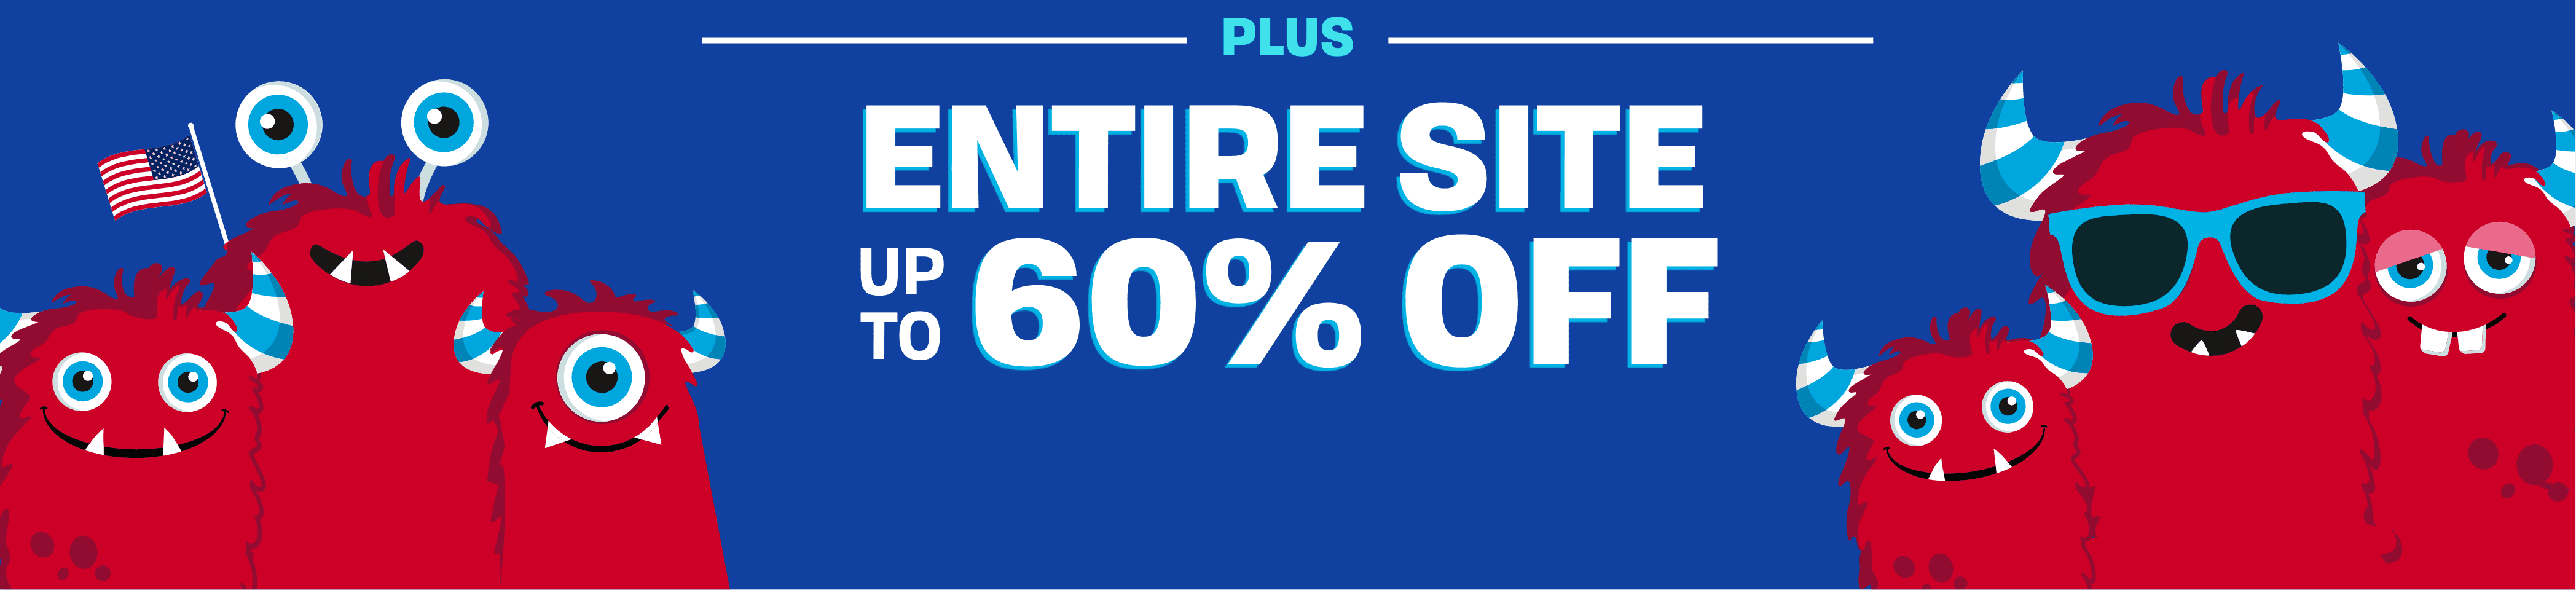 Entire Site up to 60% Off